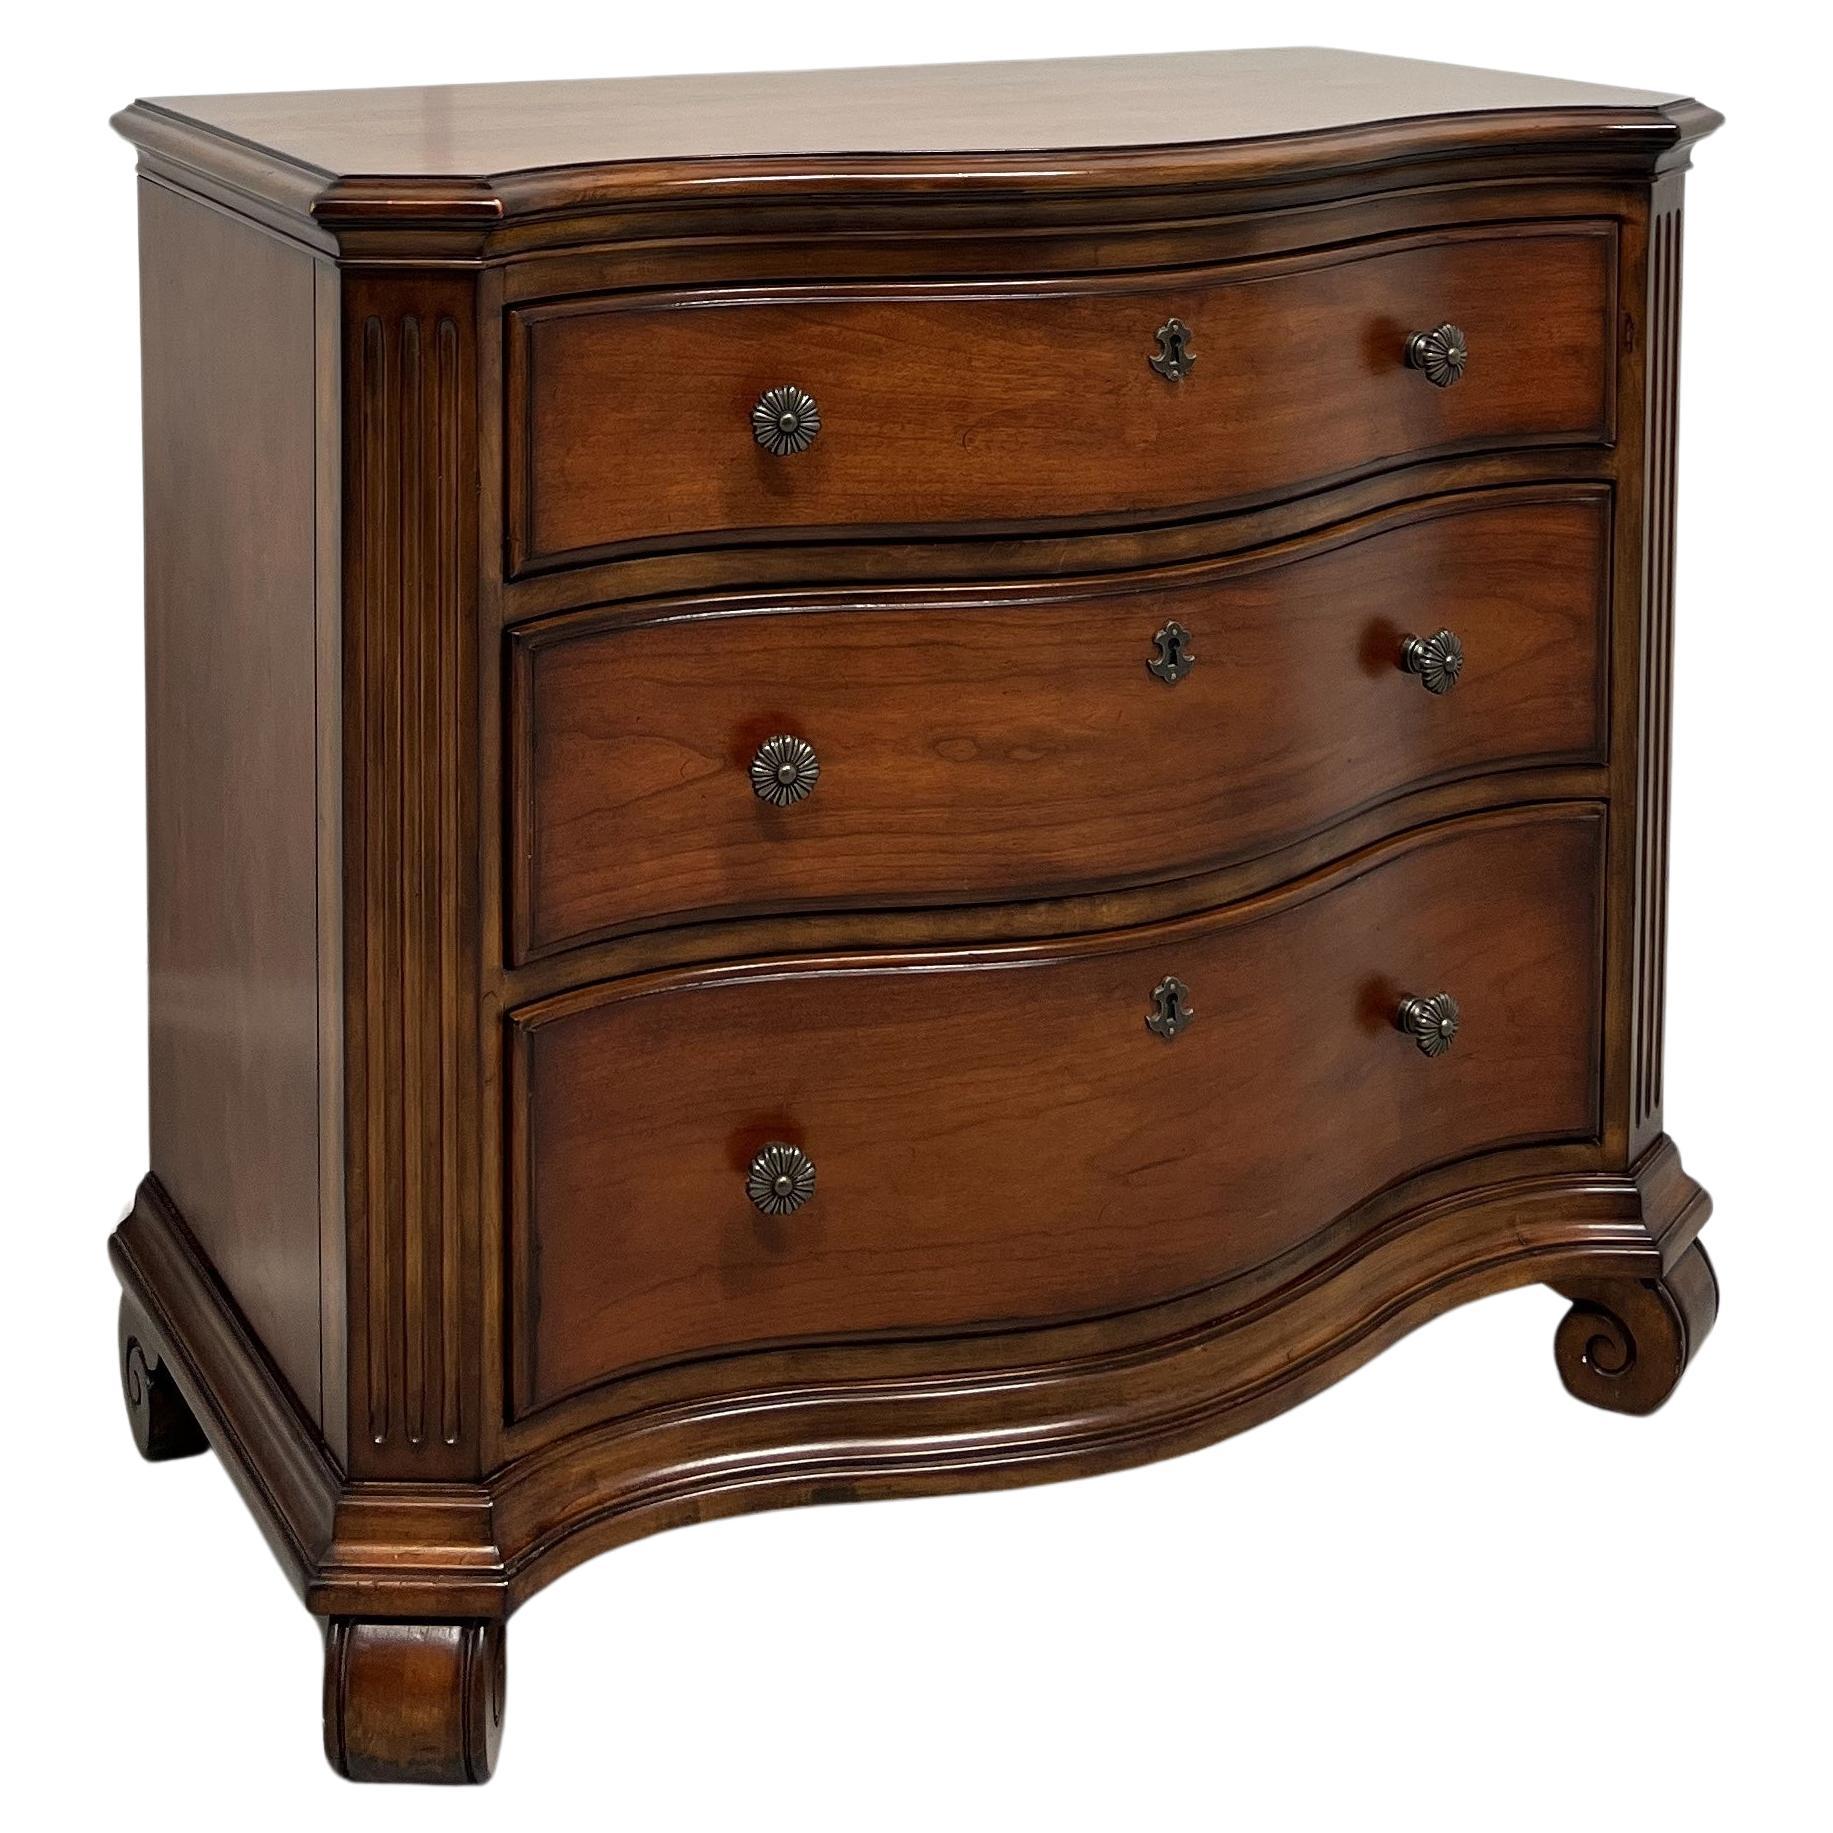 21st Century Italian Tuscan Cherry Three-Drawer Nightstand Bedside Chest For Sale